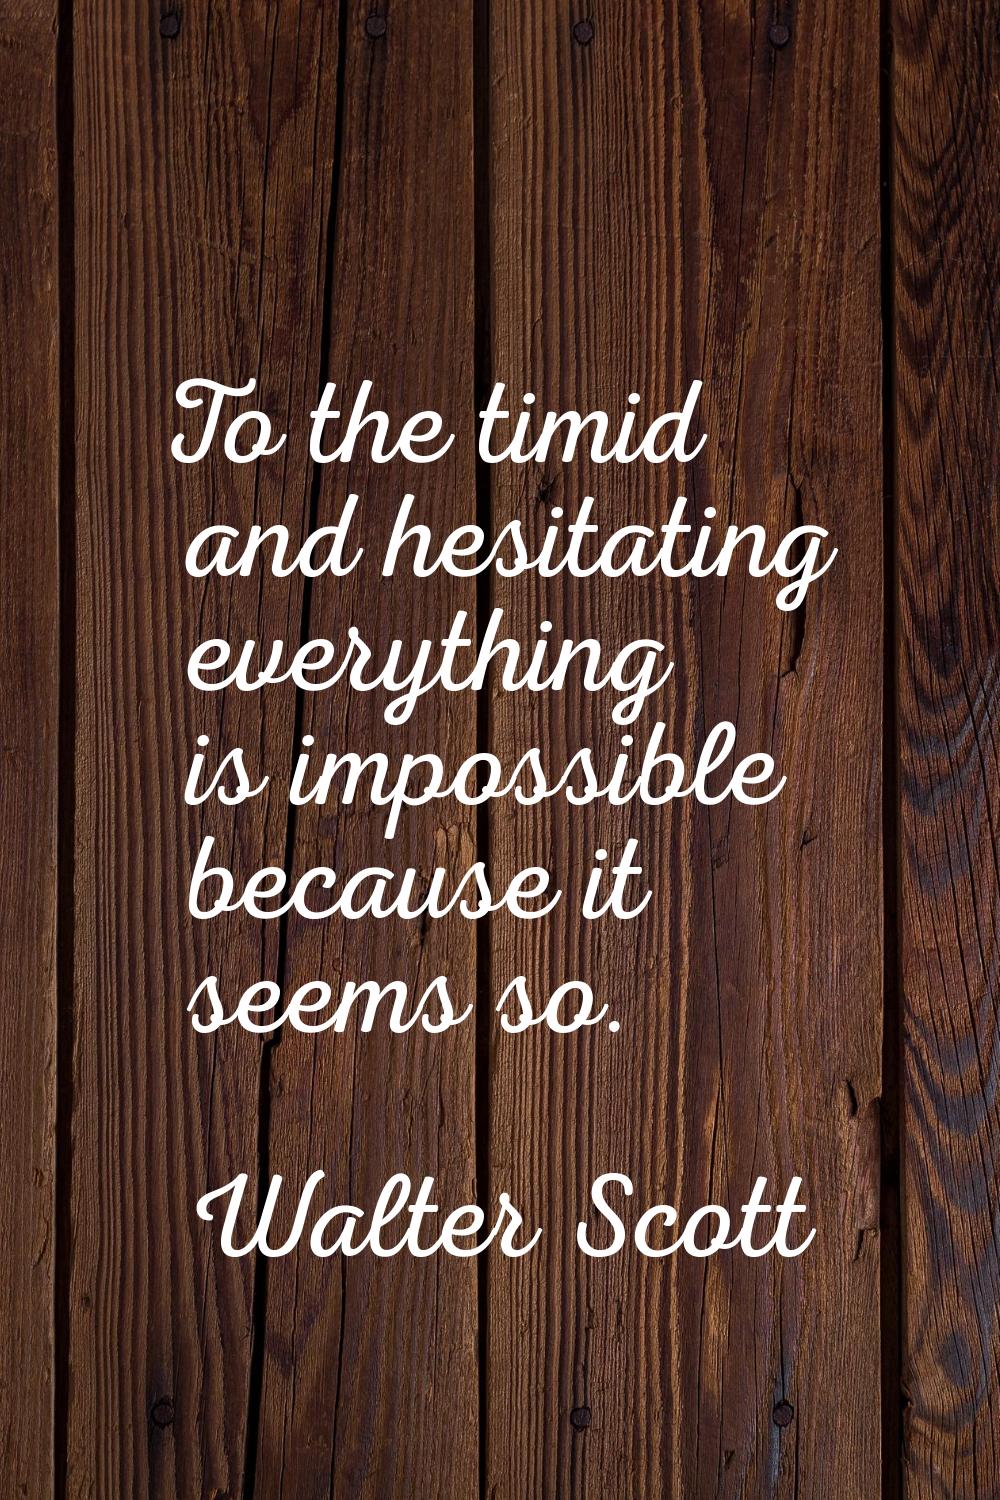 To the timid and hesitating everything is impossible because it seems so.